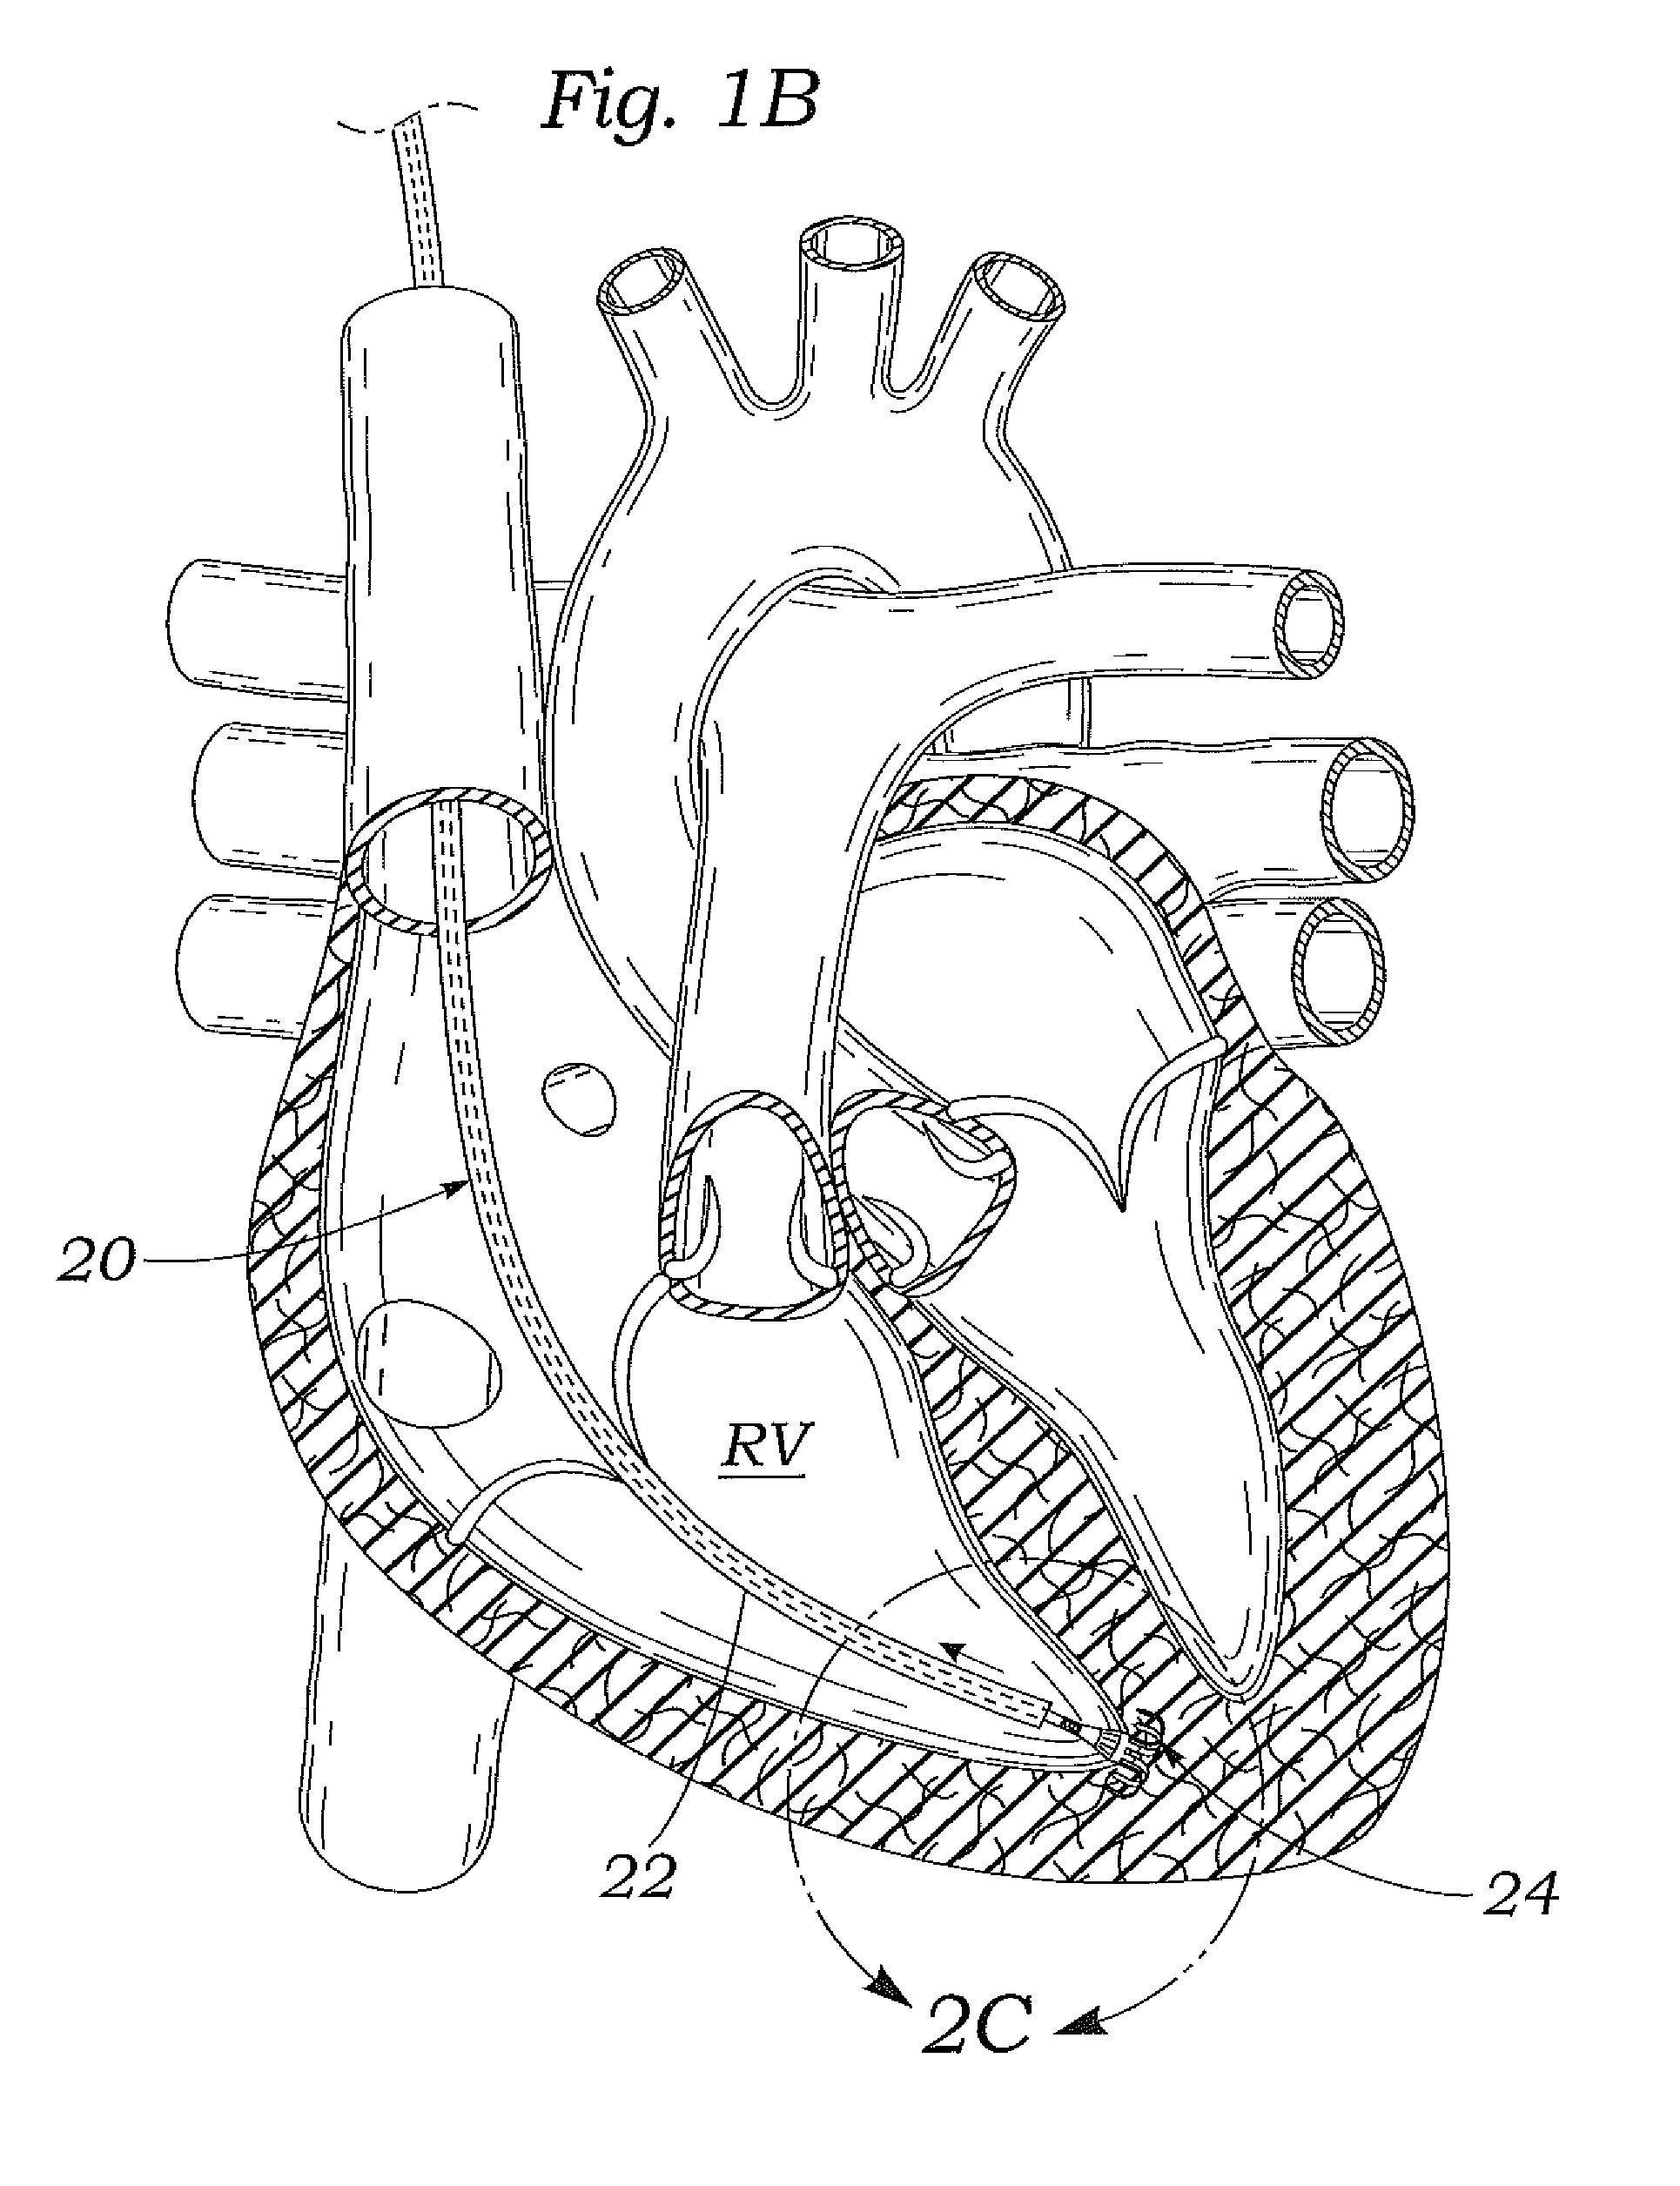 Systems and methods for placing a coapting member between valvular leaflets